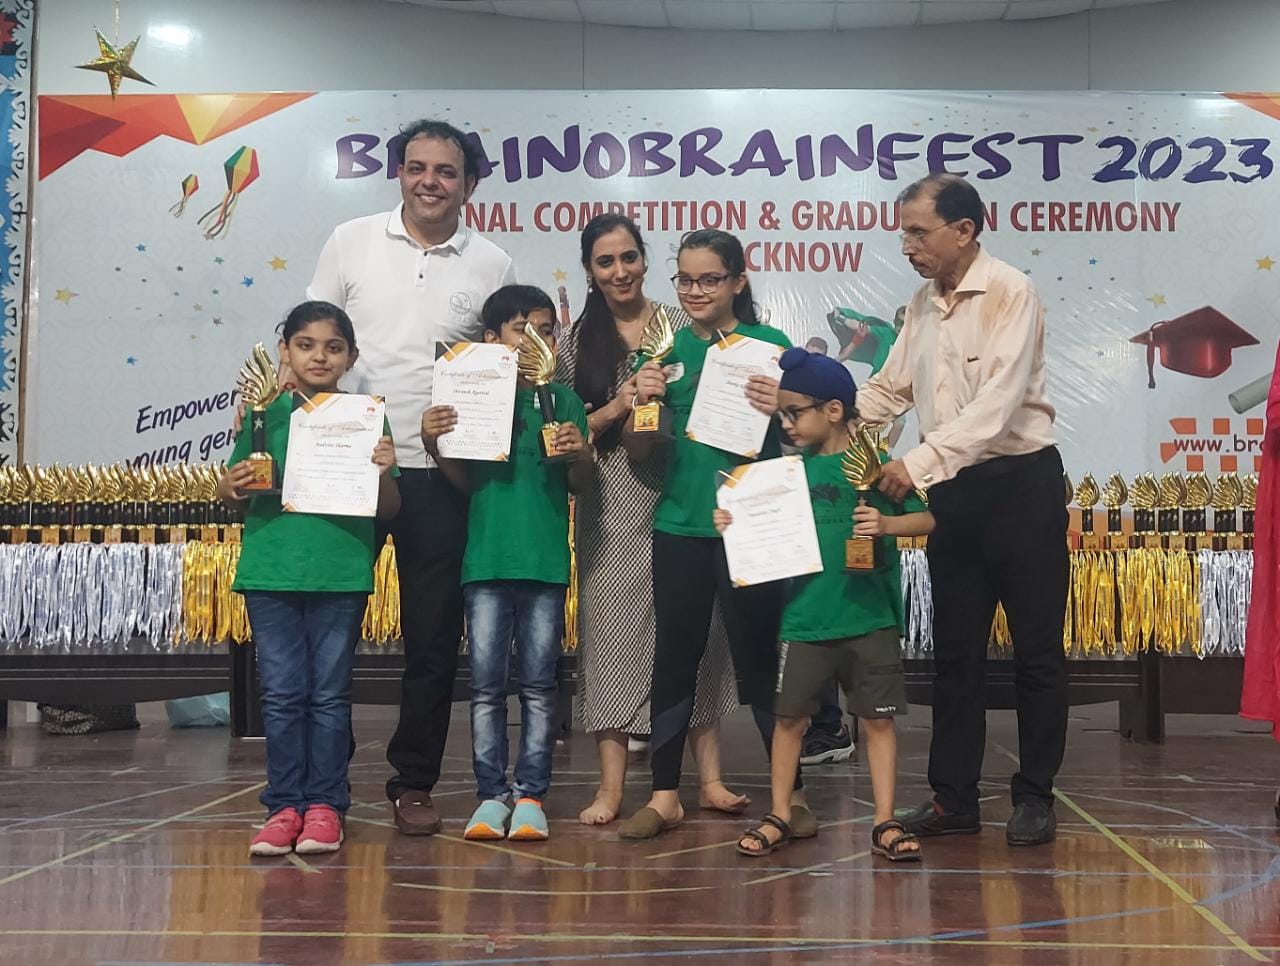 Anav Sharma of Grade 3 won the gold medal and Aadvita Sharma won the championship trophy in the Brain-o-brain zonal competition held at The Millennium School, Southcity on 16.04.23.